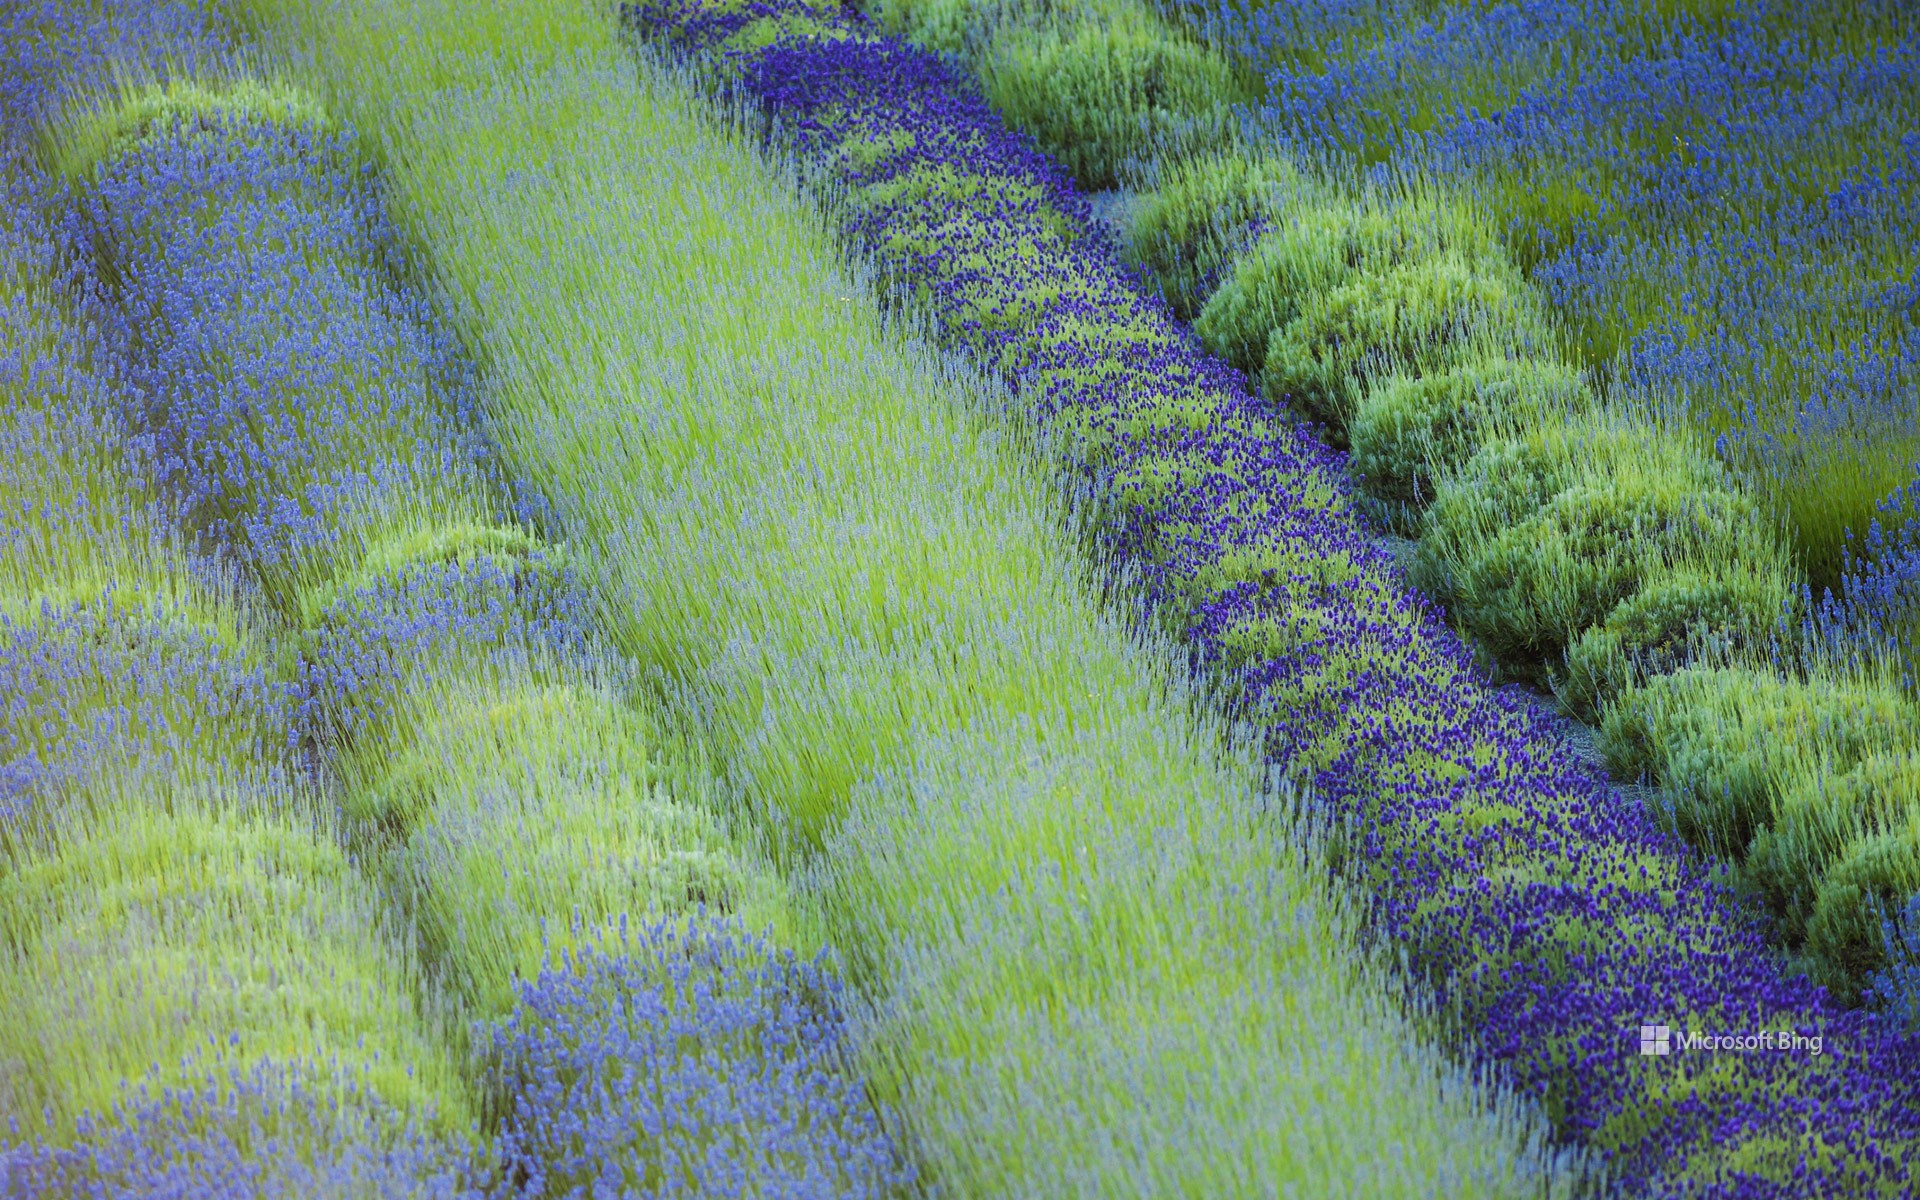 Rows of different lavender plants in a field in the Cowichan Valley in British Columbia